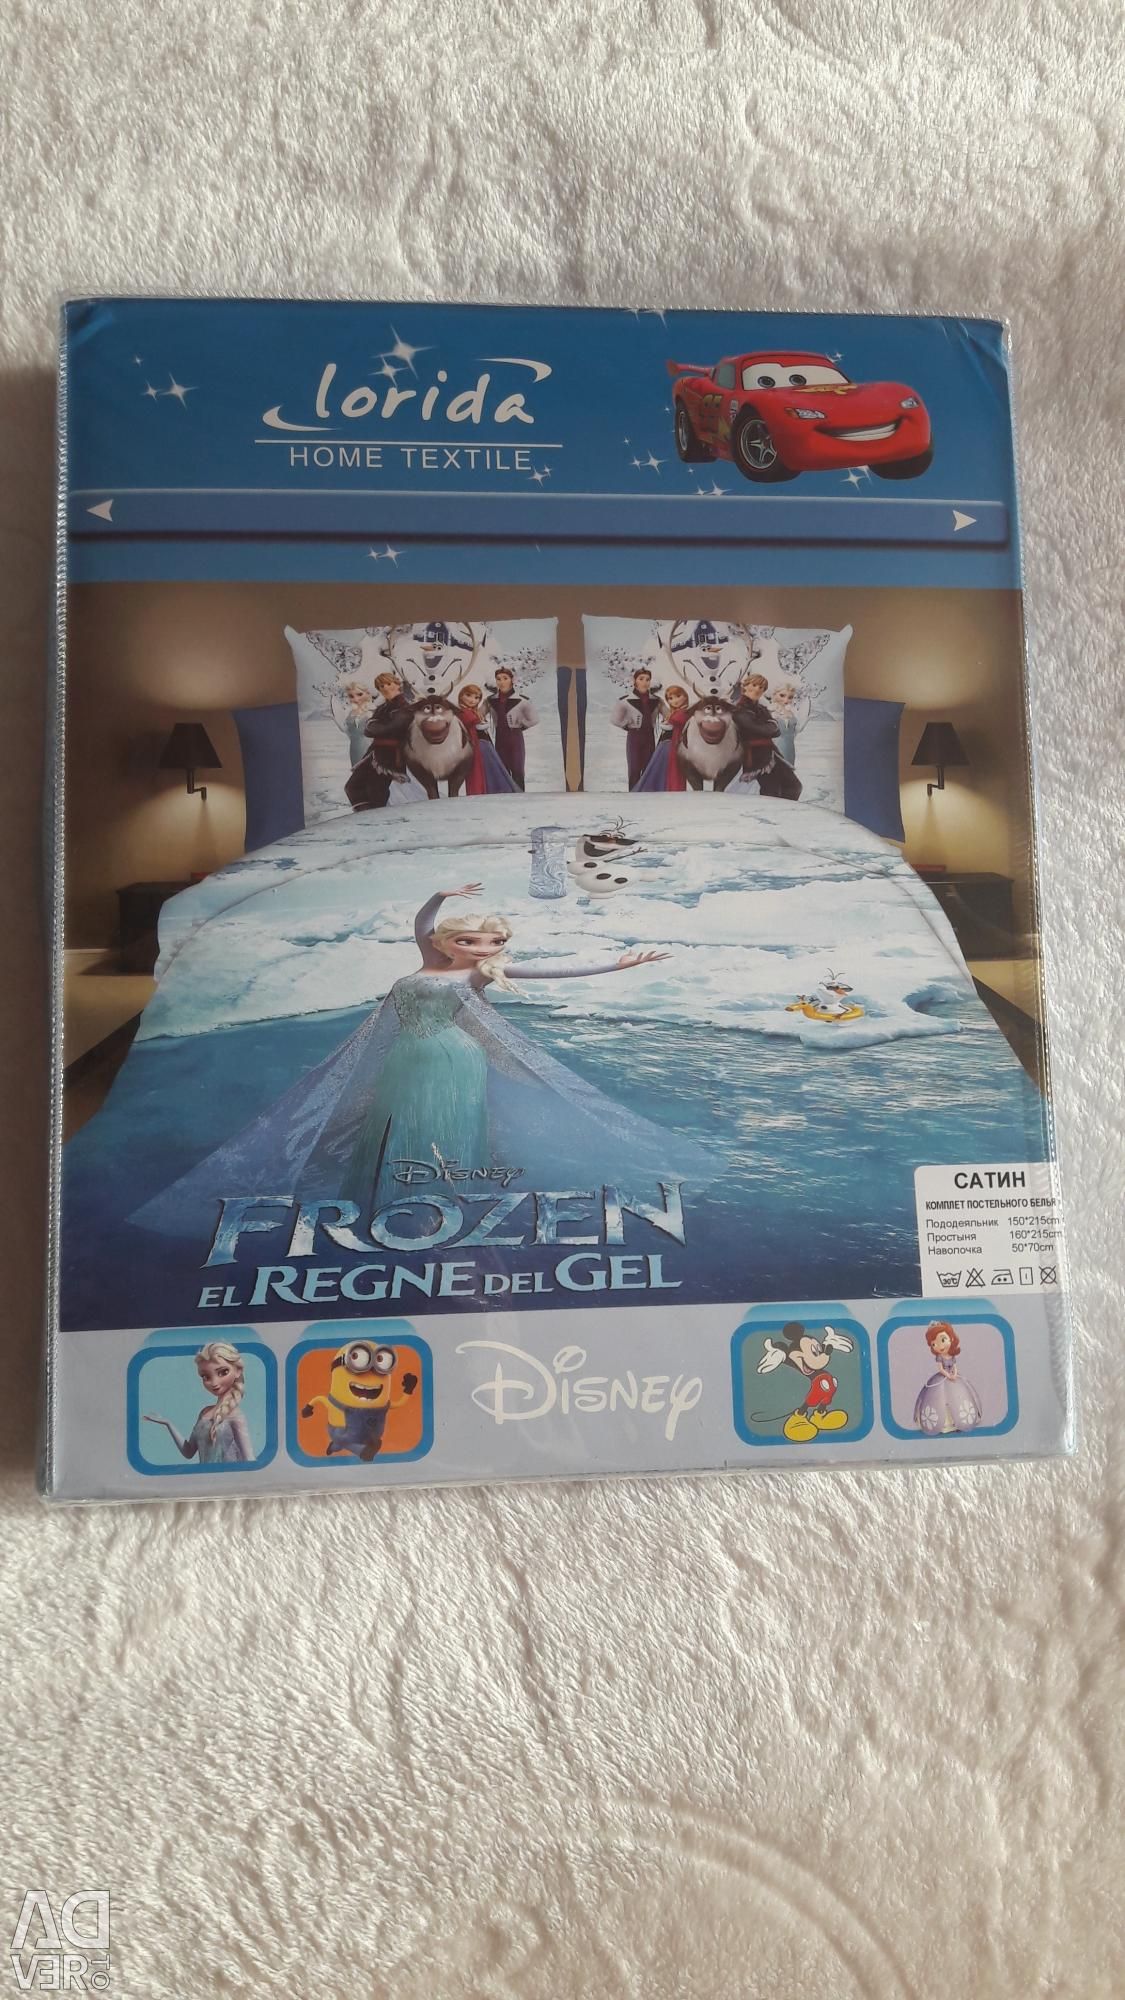 Children S Bed Linen City Saint Petersburg Advert To Sell Price 850 Rub Posted 22 02 2019